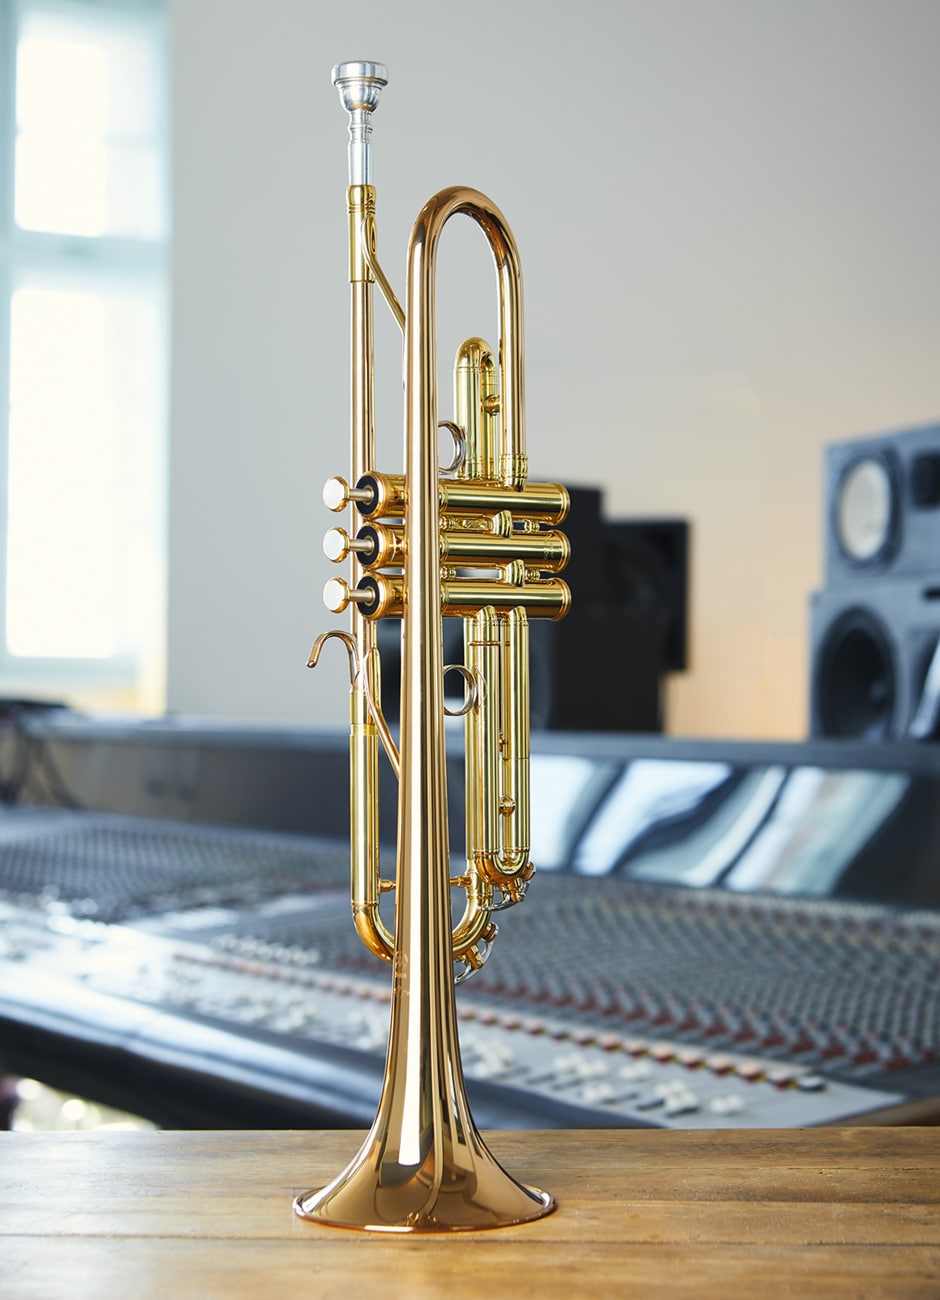 YTR-6335RC - Overview - Bb Trumpets - Trumpets - Brass & Woodwinds 